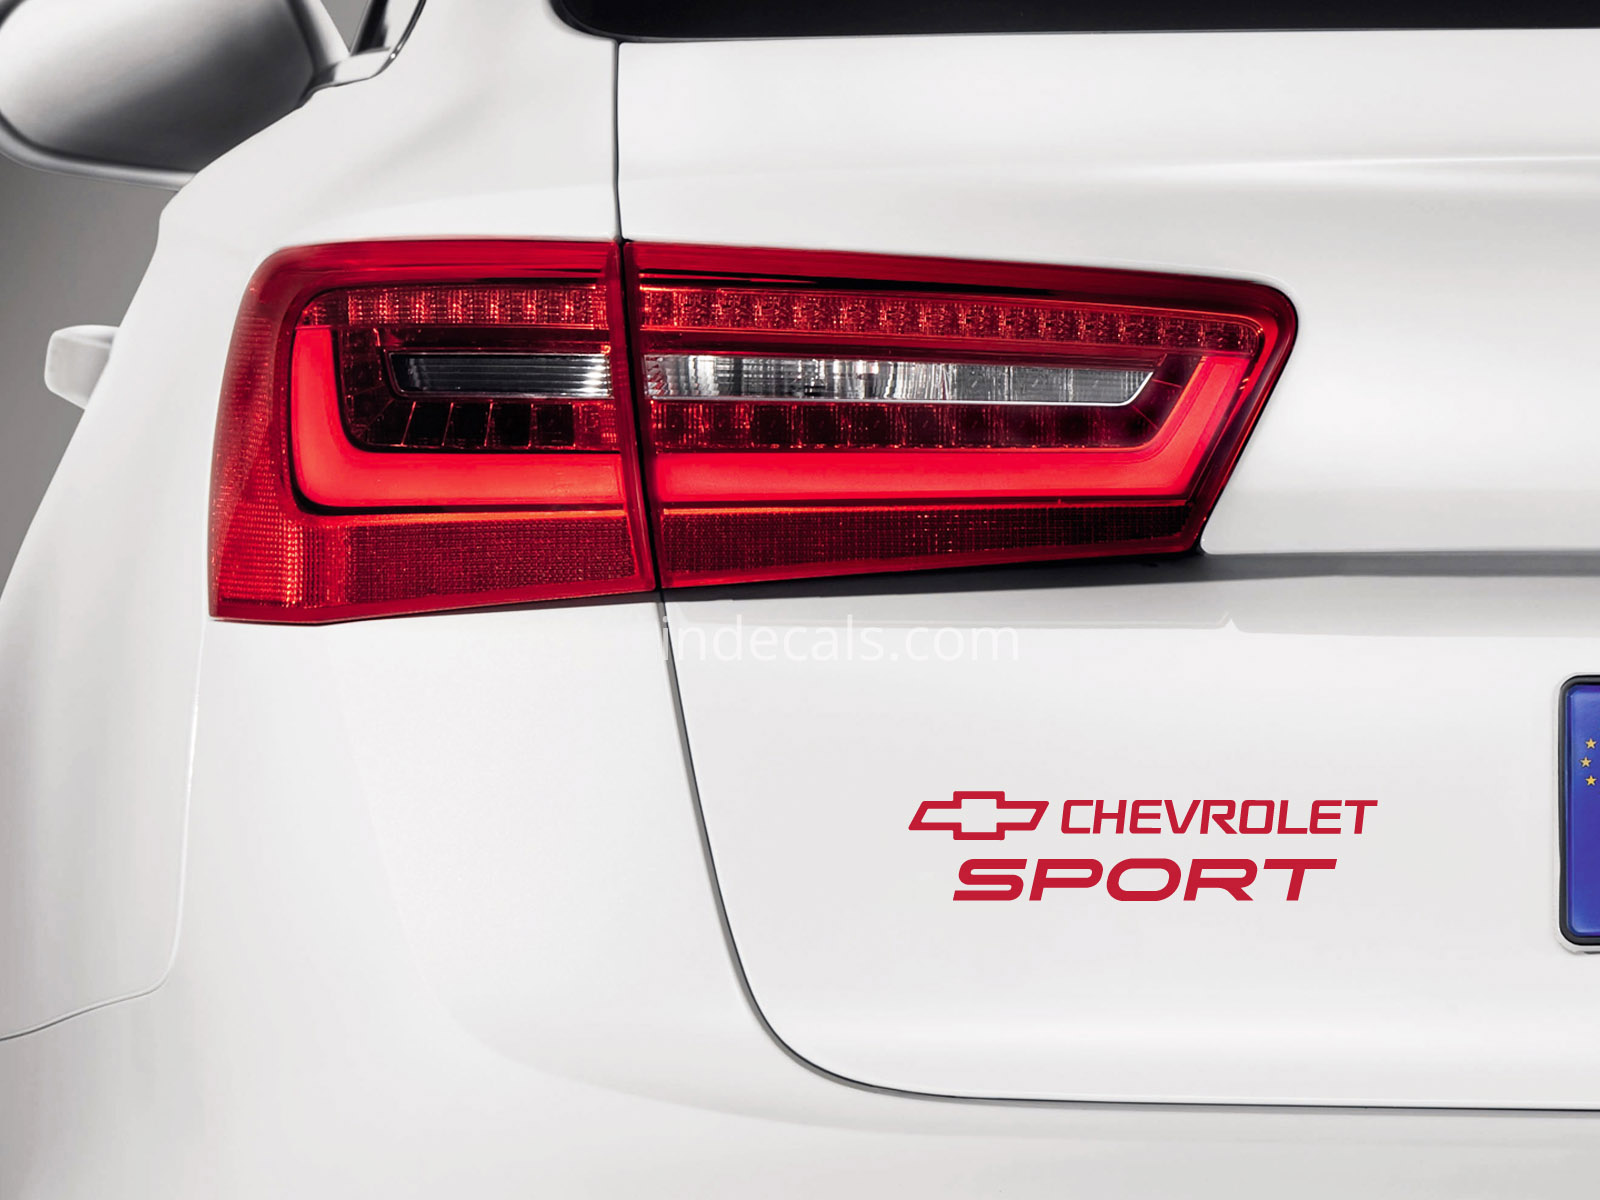 1 x Chevrolet Sports Sticker for Trunk - Red